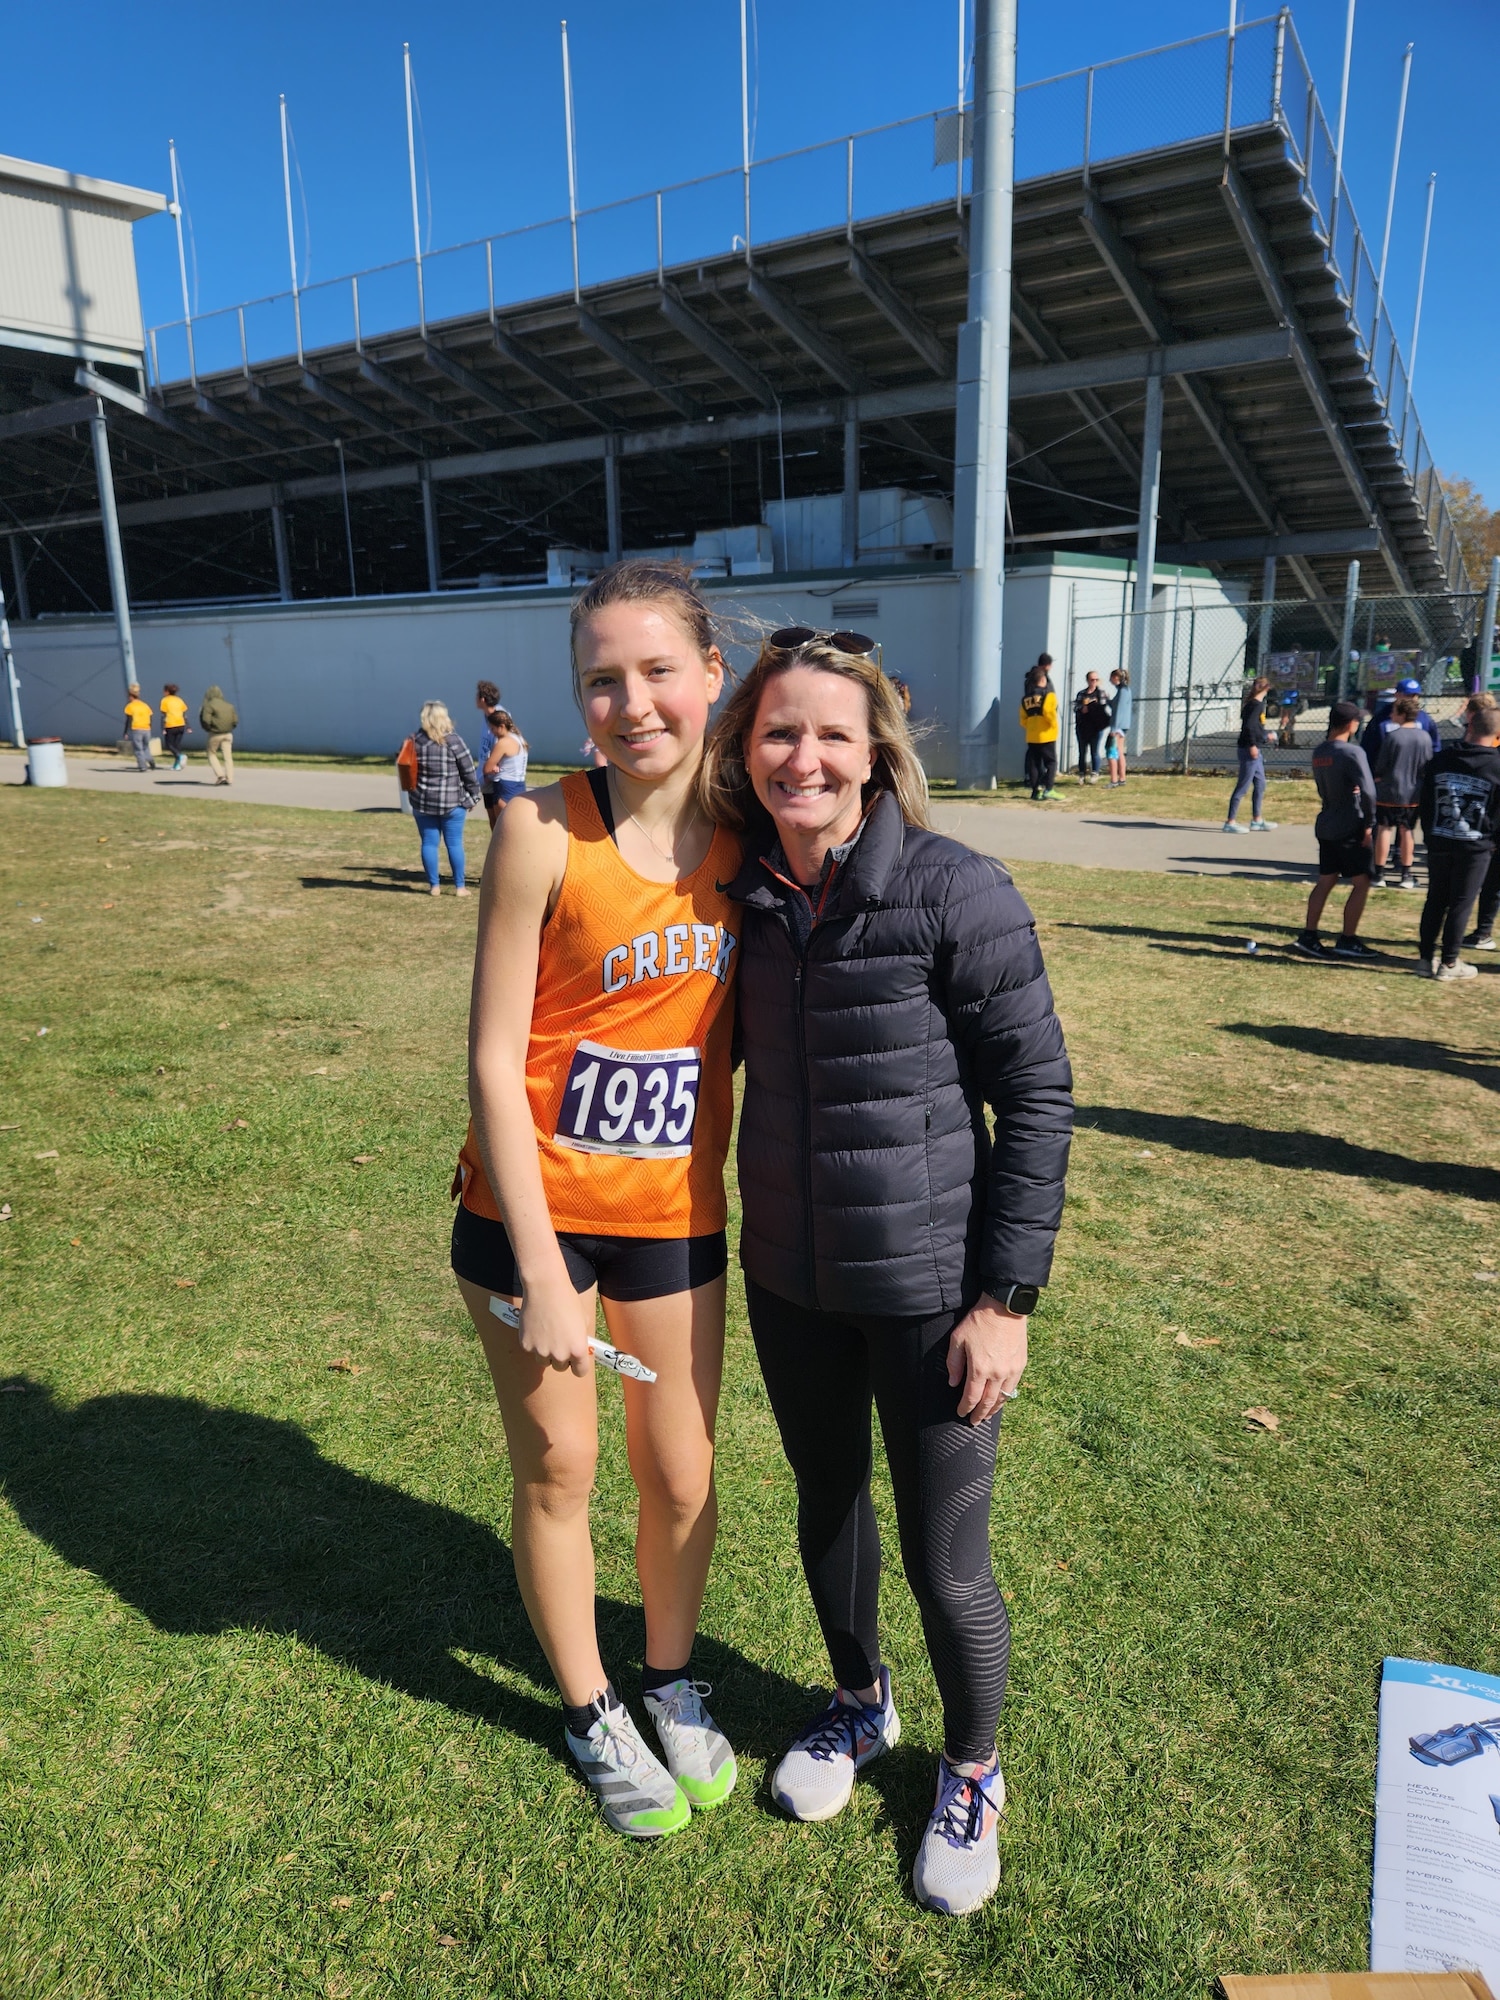 Col. Polly Sandness, with daughter Maren, after a cross country sporting event. (Courtesy photo)